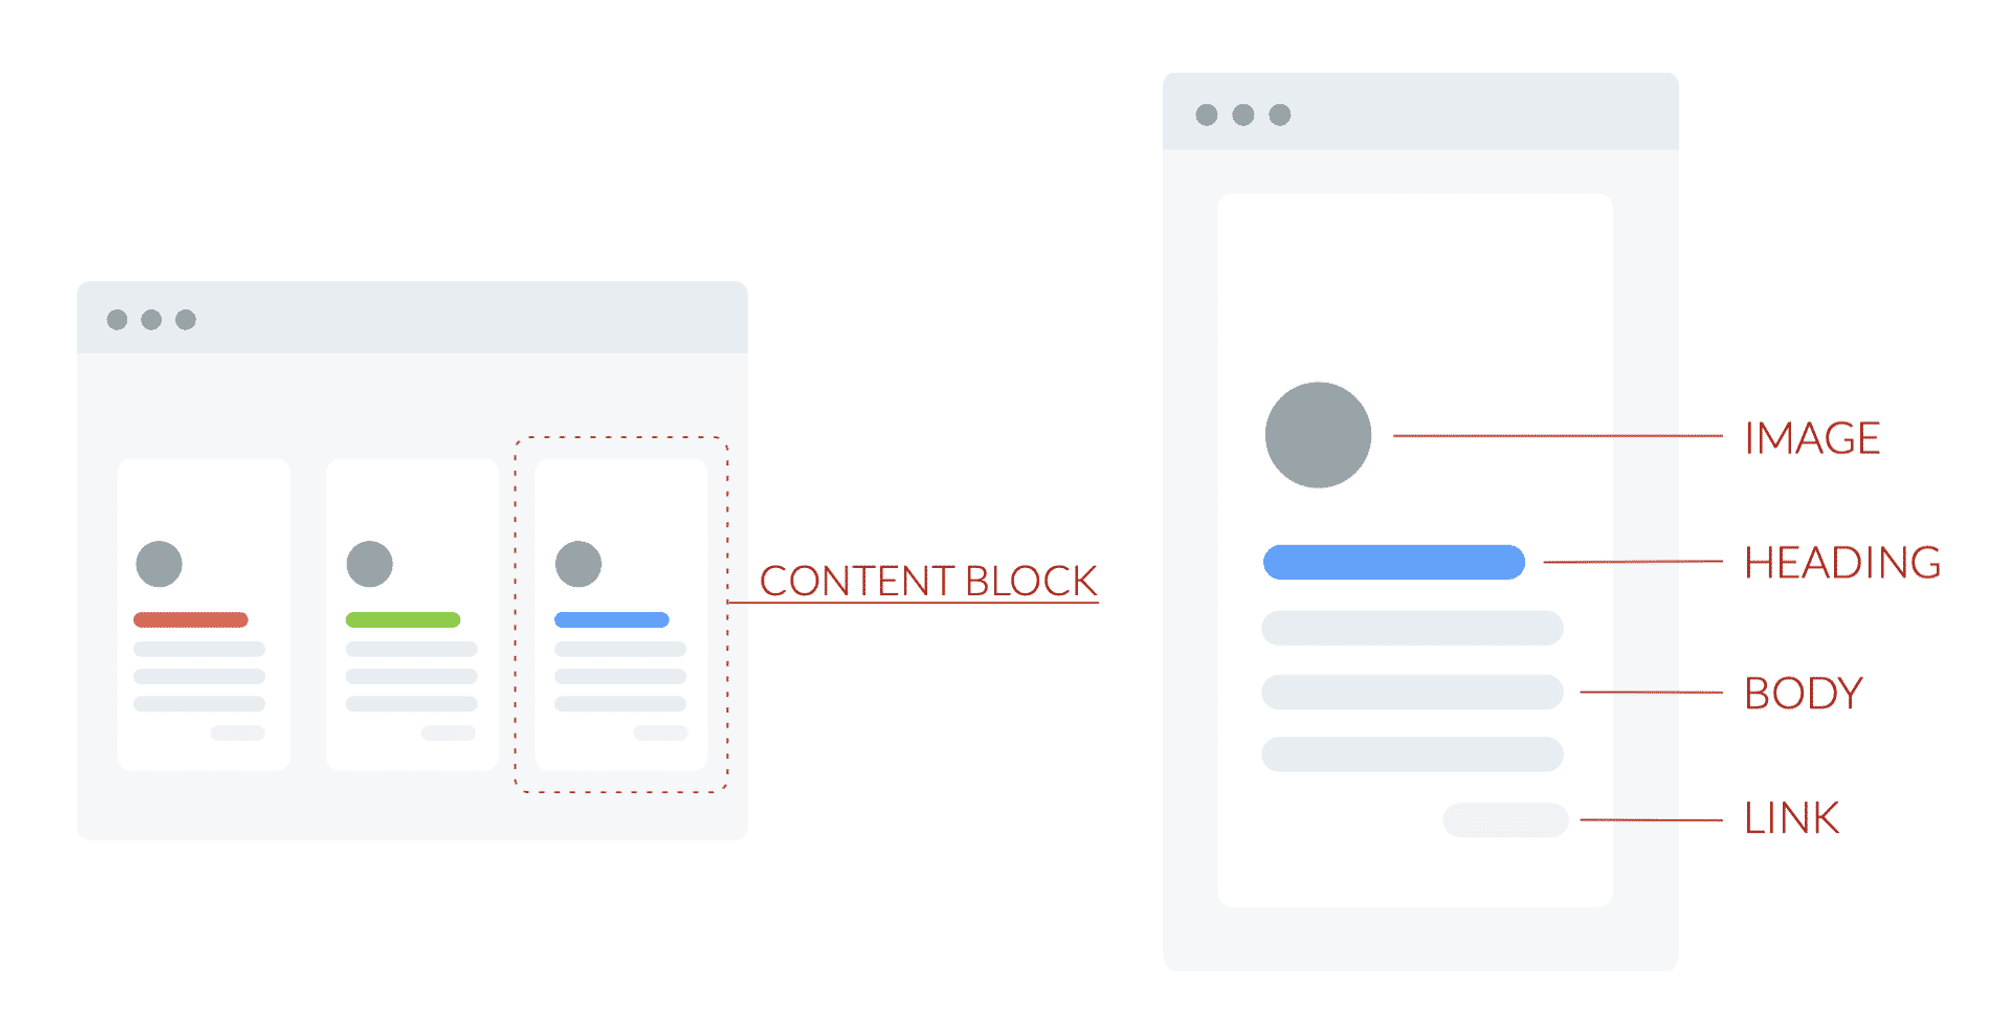  Content blocks help users scan, comprehend, and retain information on your landing pages.